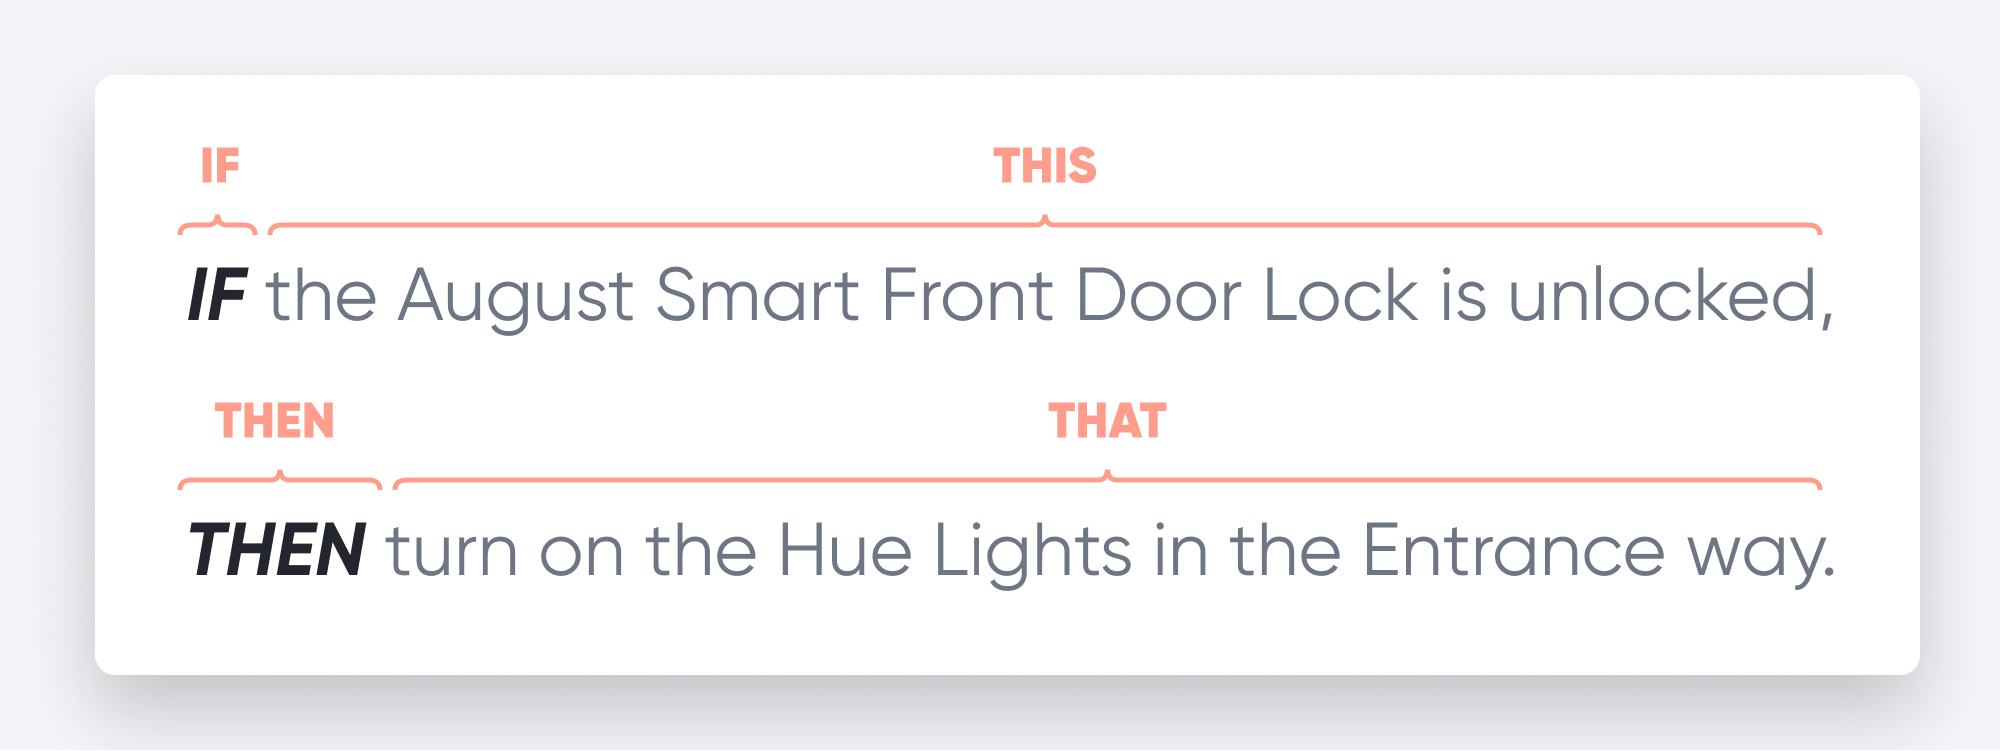 IF the August Smart Front Door Lock is unlocked, THEN turn on the Hue Lights in the Entrance way.